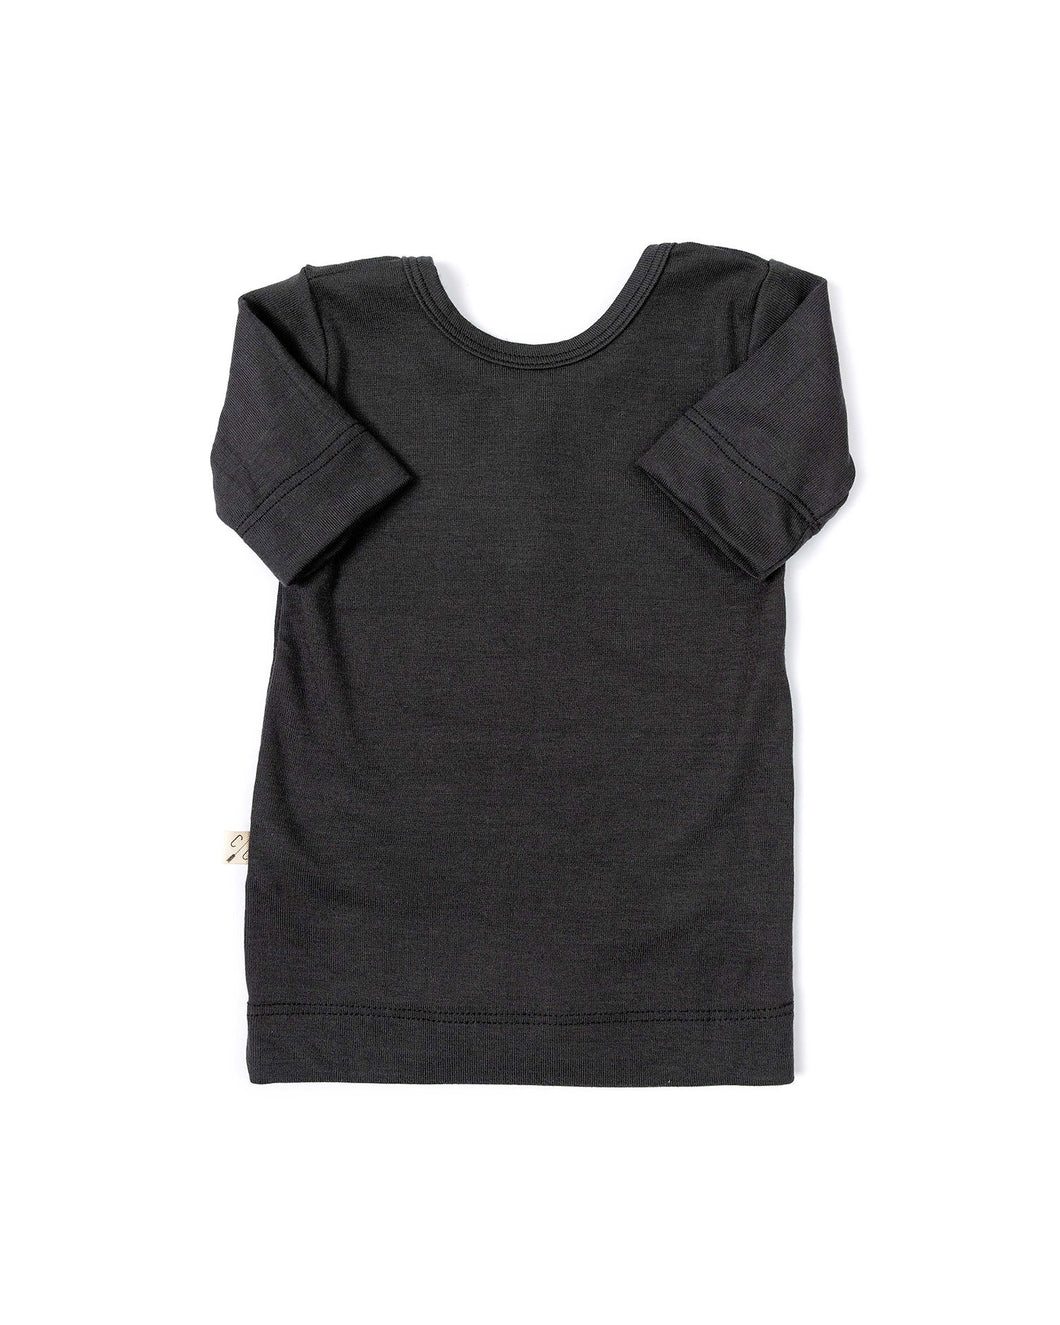 ballet top - midnight 1x1 – Childhoods Clothing